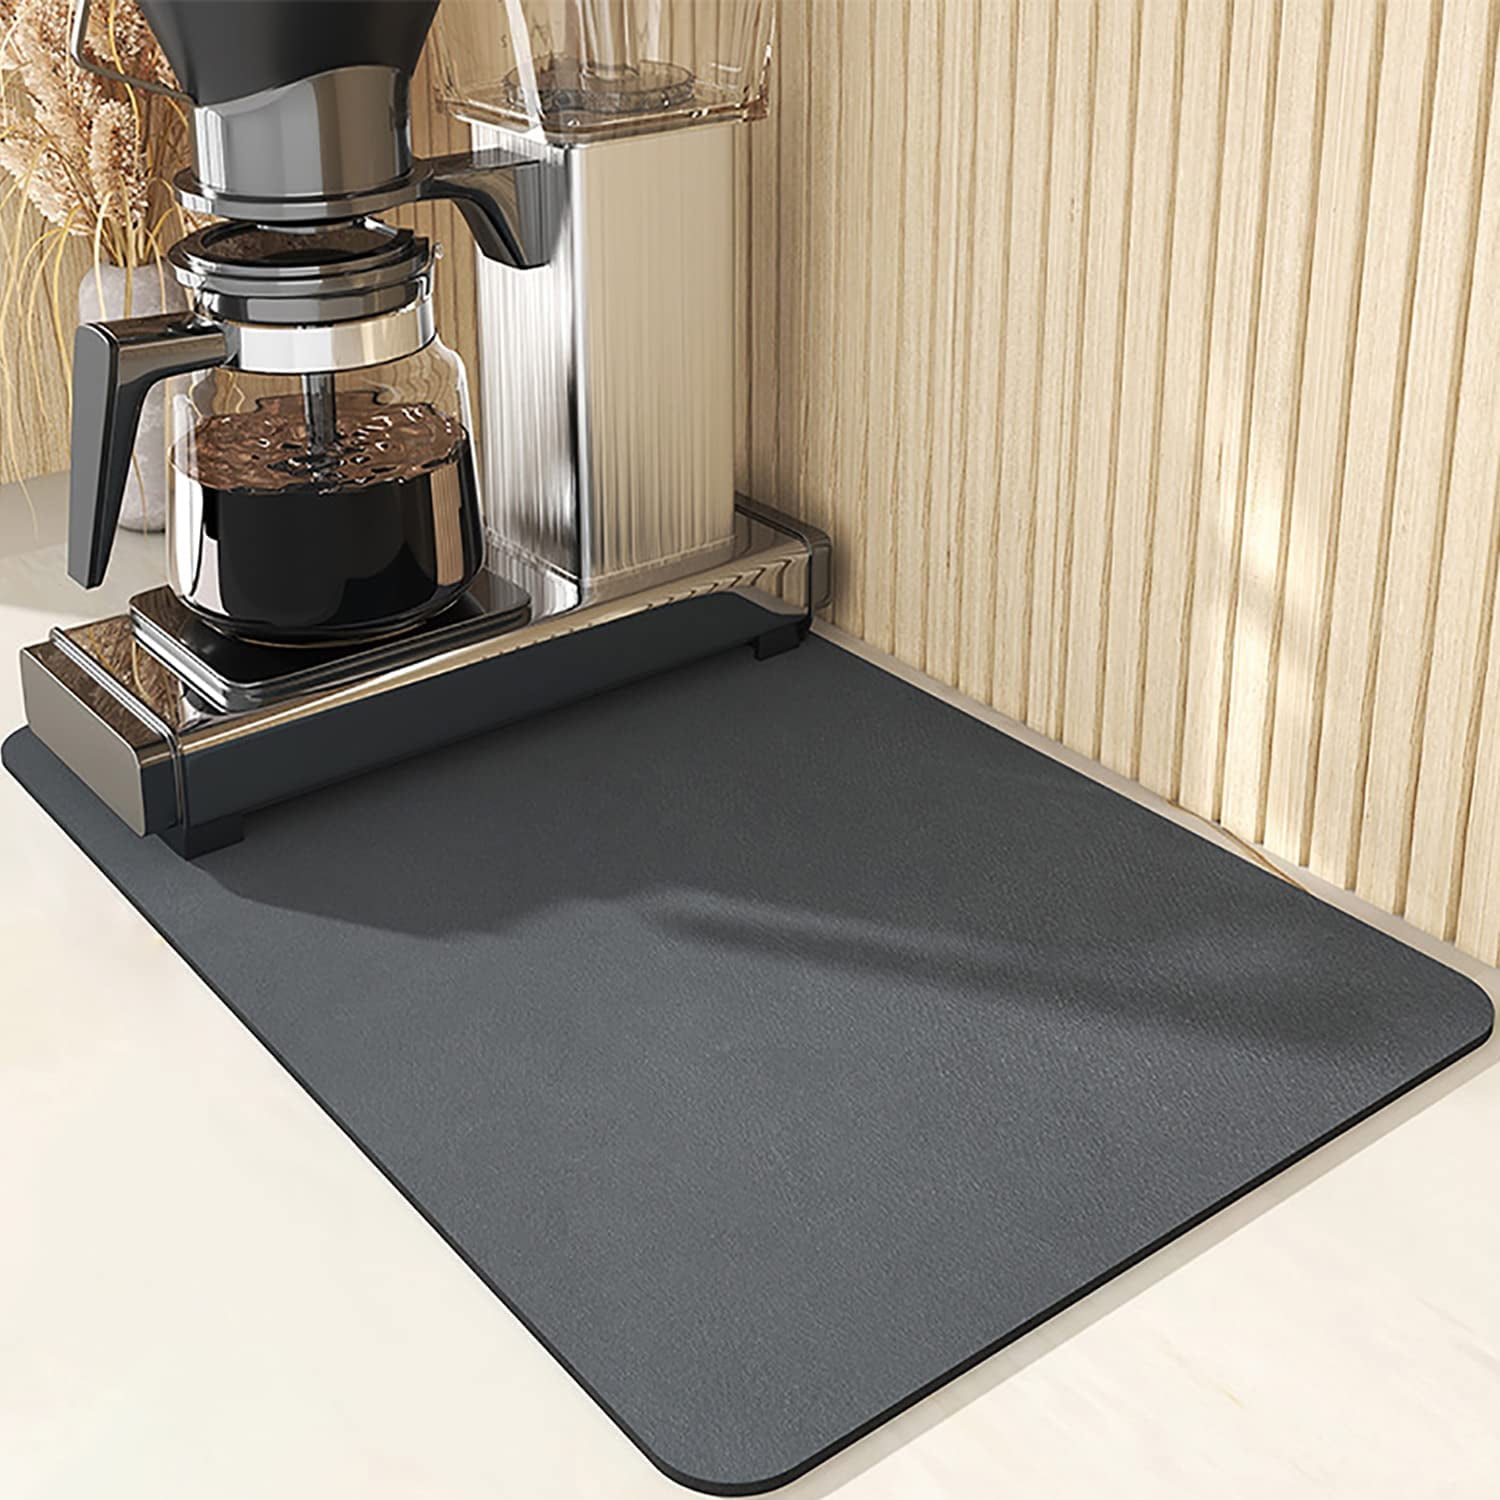 Coffee Mat - 12 x 16 Small Absorbent Kitchen Drying Mat for